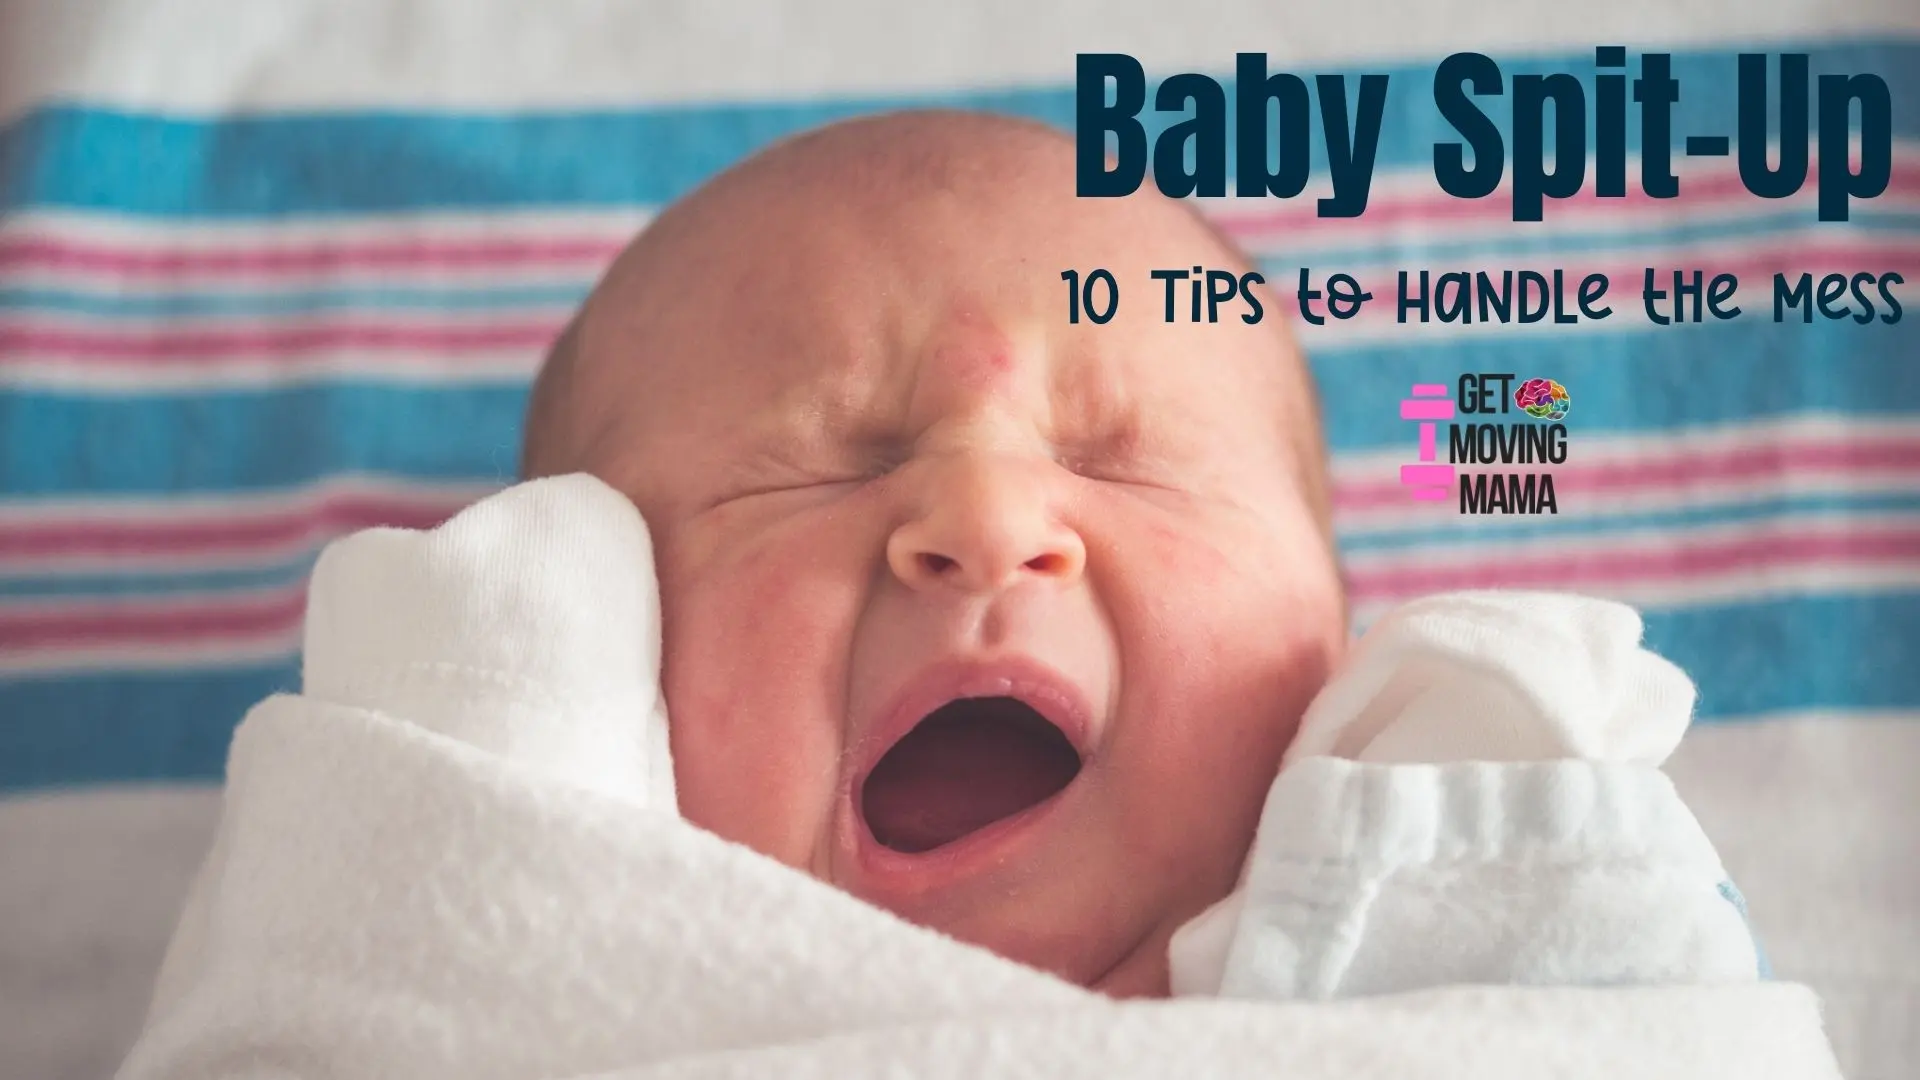 Baby Spit-Up: 10 Helpful Tips for Dealing with the Mess